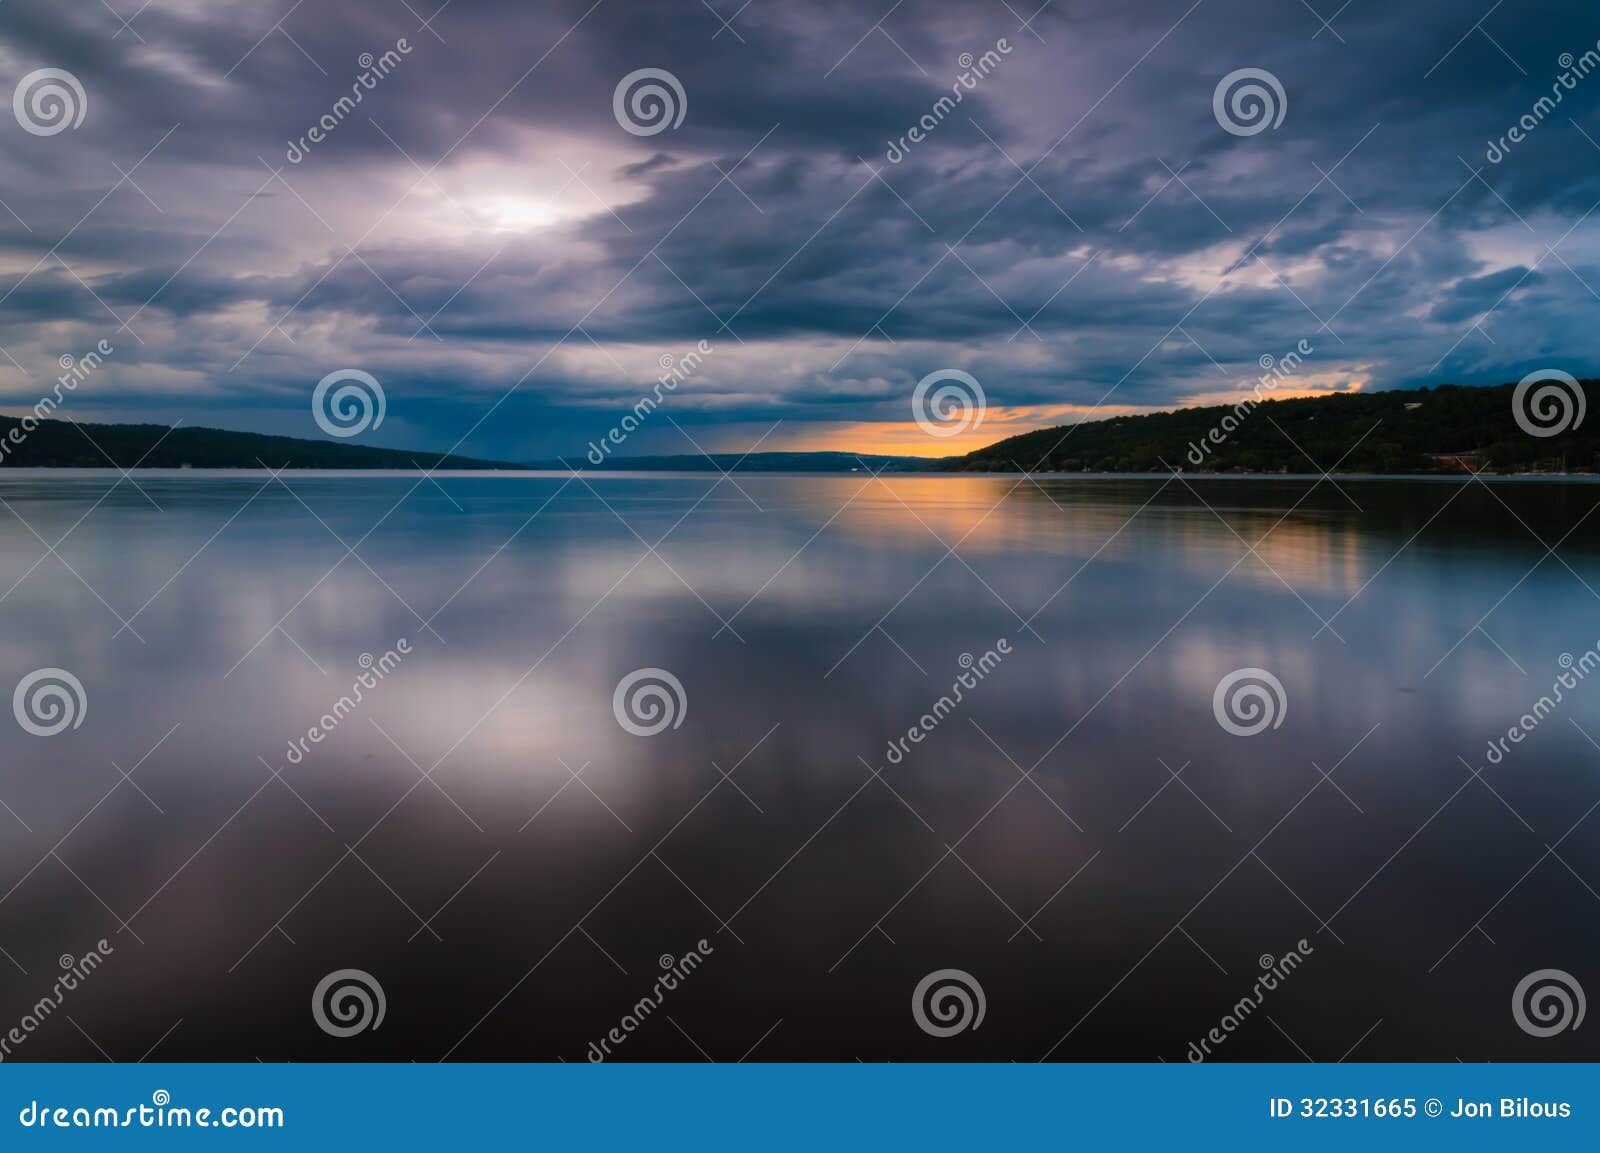 storm clouds move over lake cayuga in a long exposure